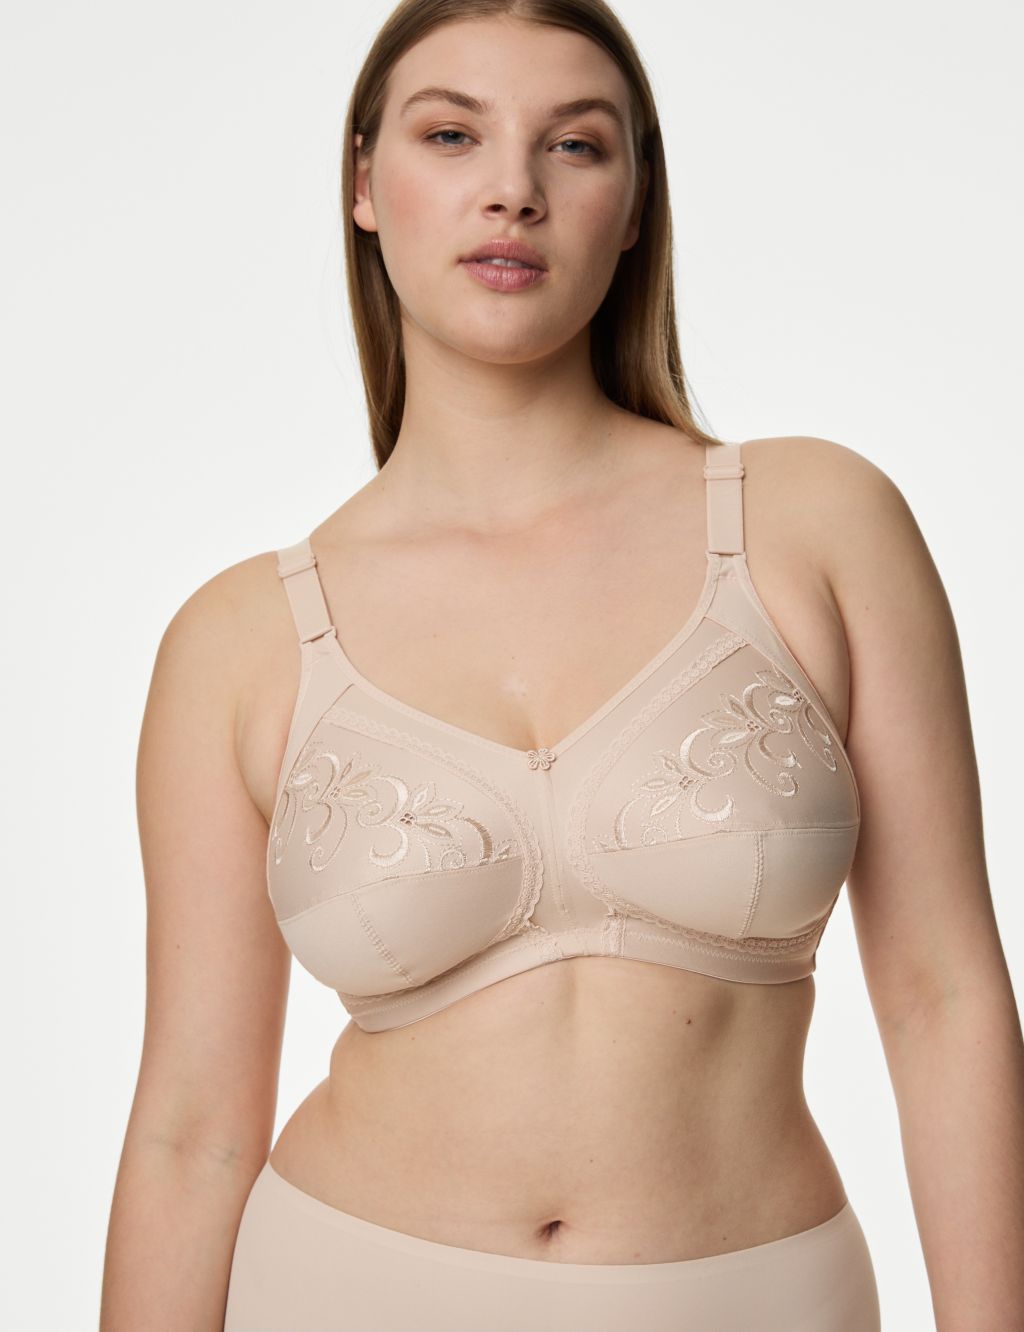 Top-Rated Nude Bras